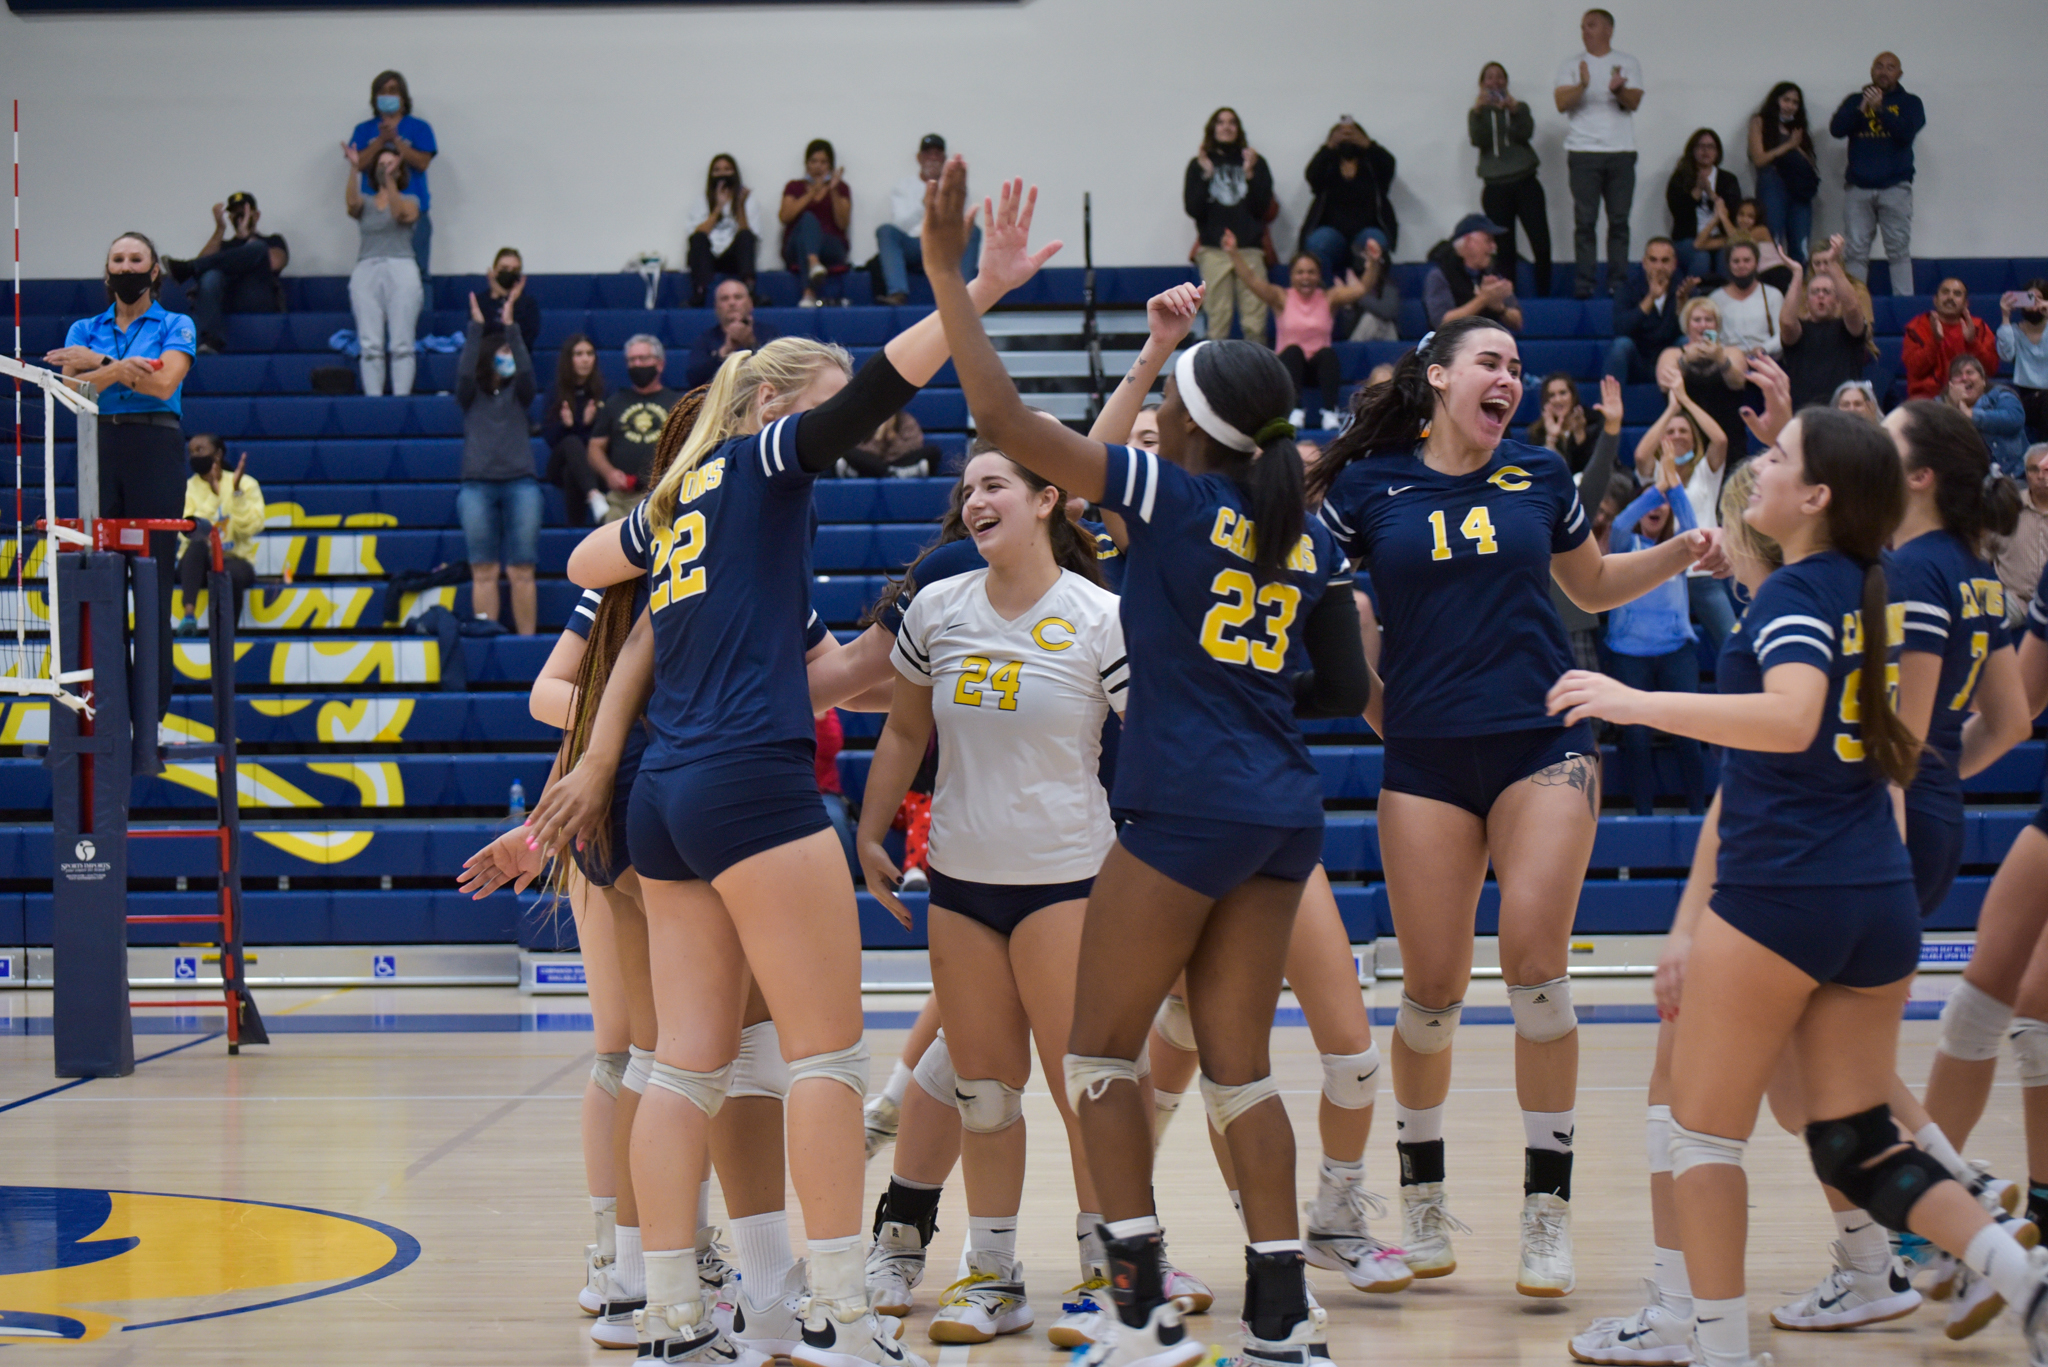 No. 15 seed College of the Canyons defeated No. 18 Mt. San Jacinto by a 3-2 (25-16, 22-25, 25-17, 23-25, 15-8) final score in a play-in postseason match. The Cougars will next travel to face No. 2 Pasadena City College (23-1, 18-0) at 7 p.m. on Tuesday, Nov. 23. — Mari Kneisel/COC Sports Information